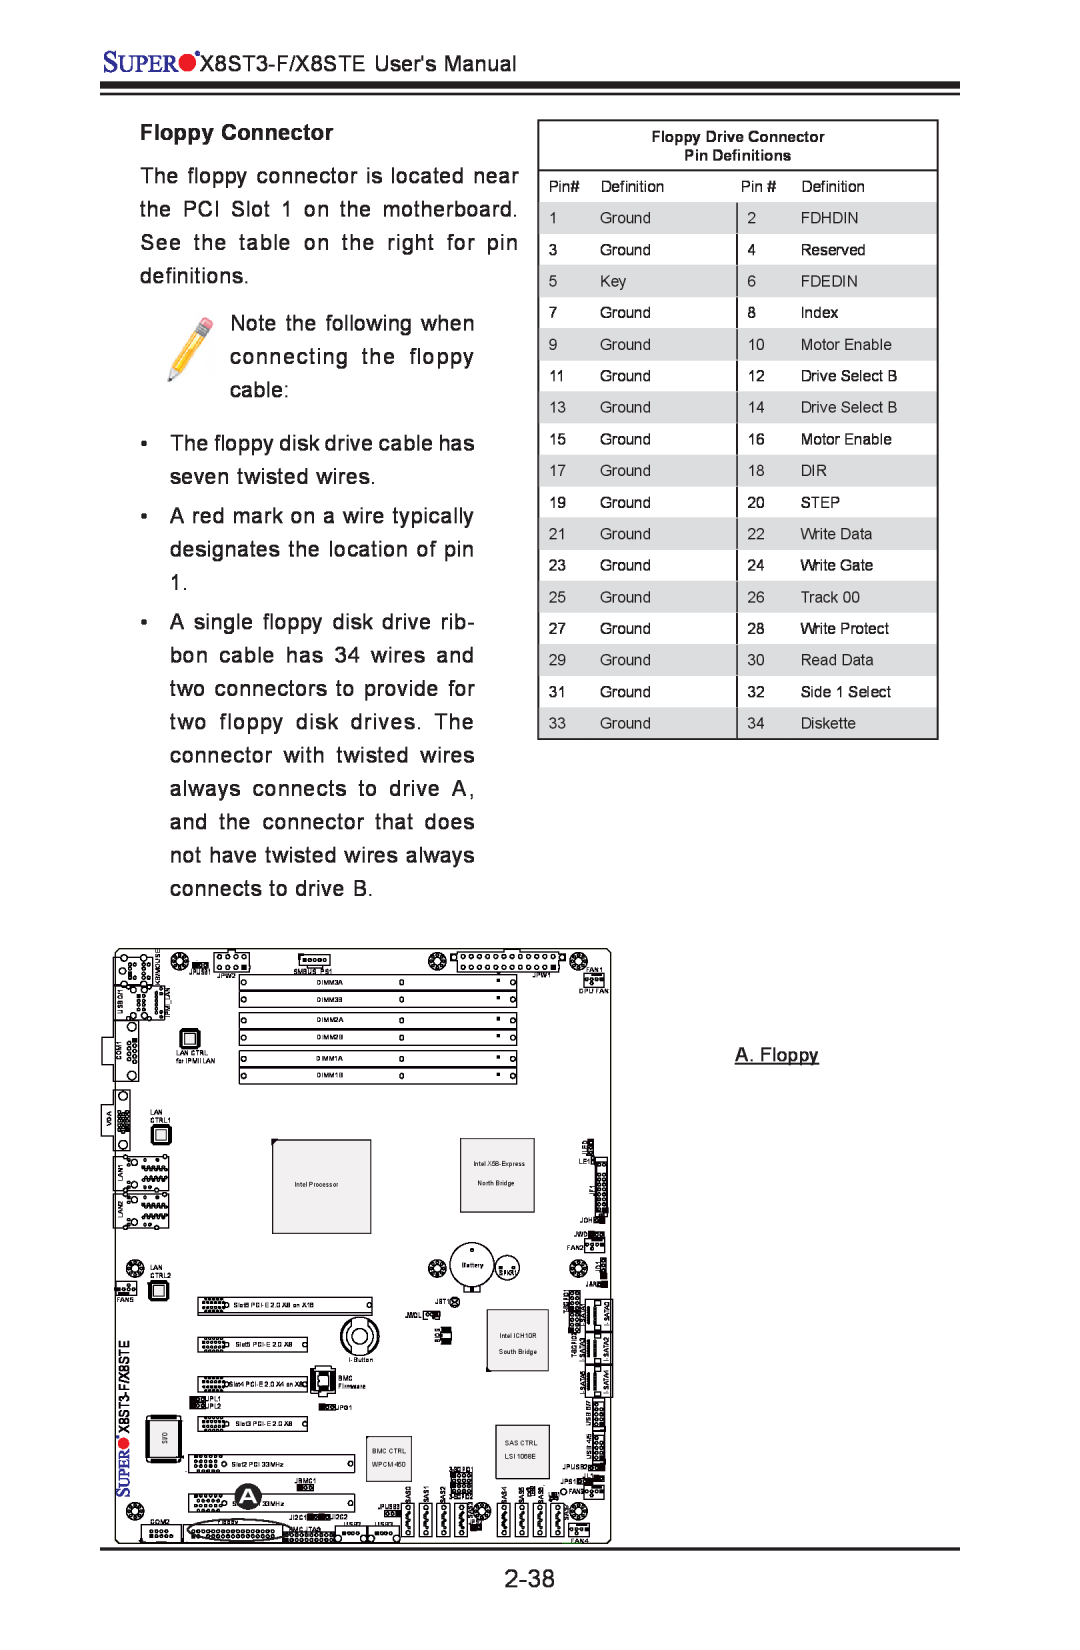 SUPER MICRO Computer X8ST3-F, X8STE user manual 2-38, Floppy Connector, A. Floppy 